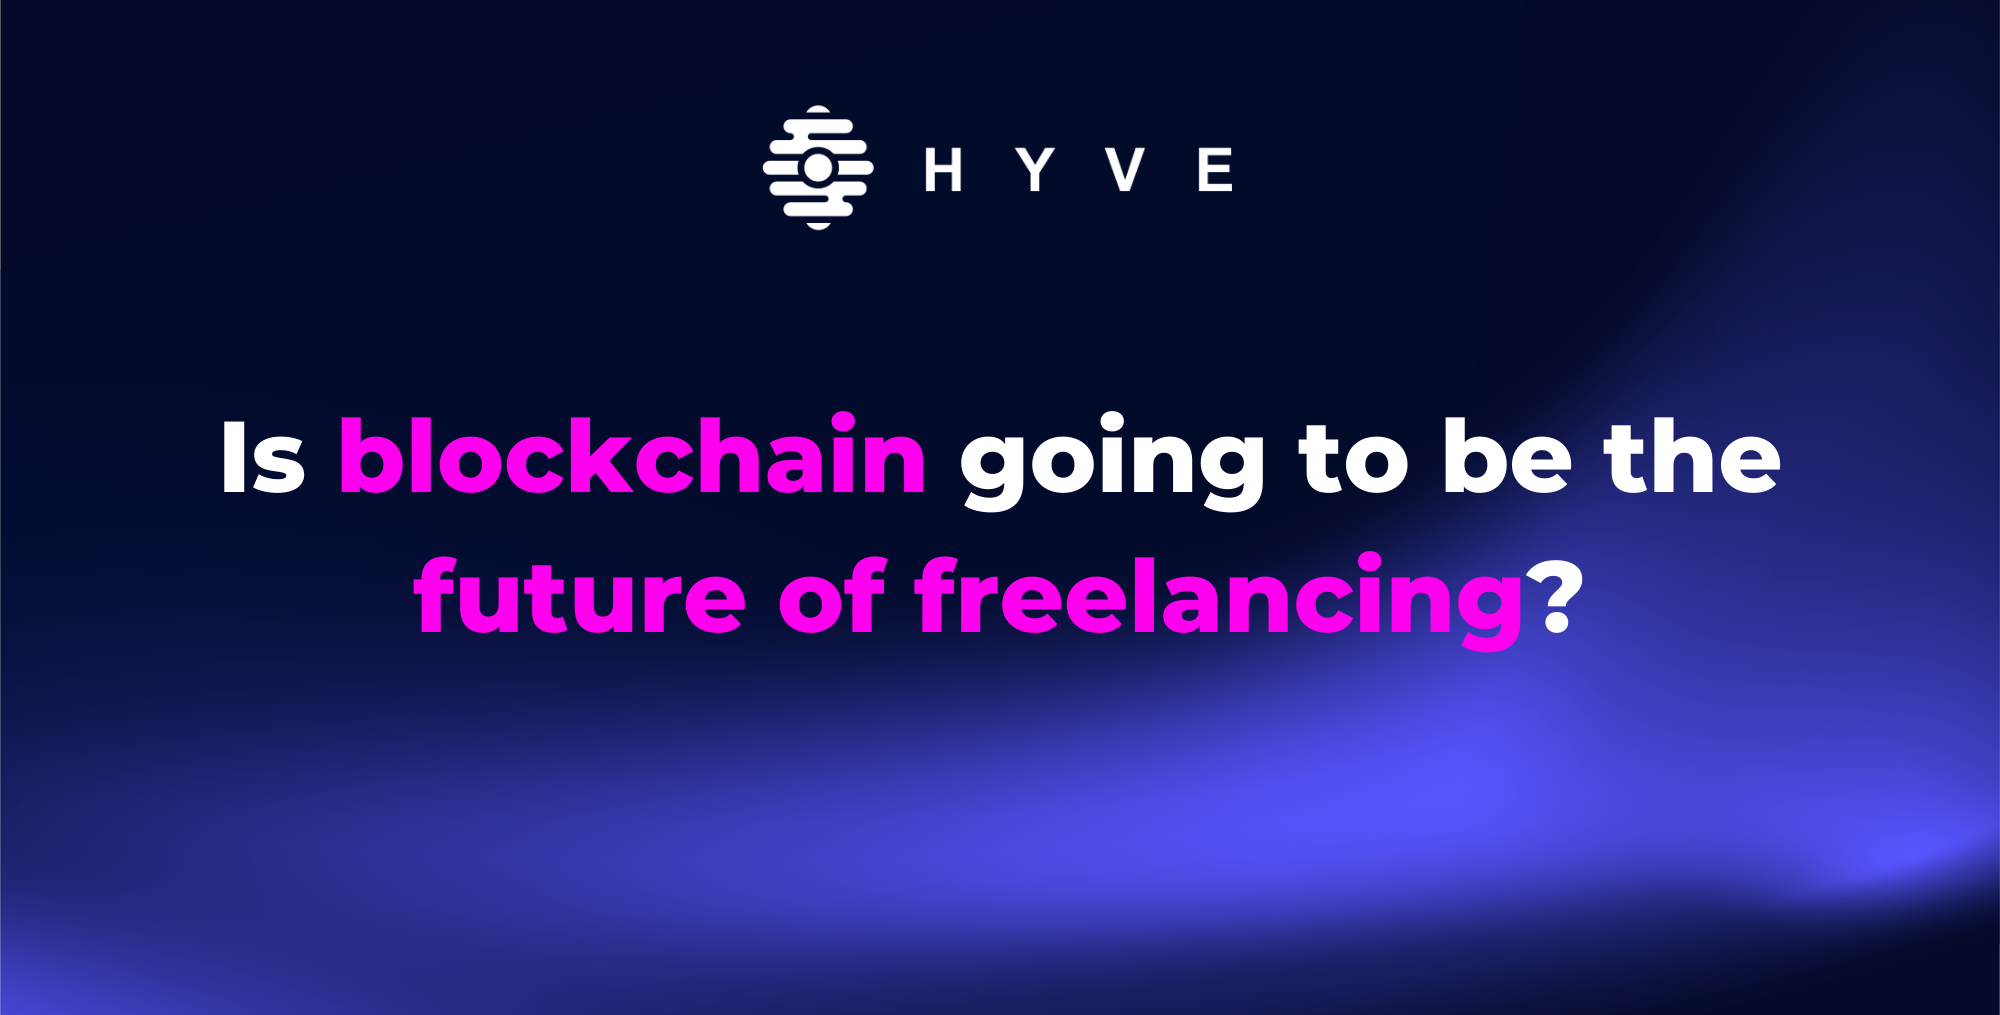 Is blockchain going to be the future of freelancing?